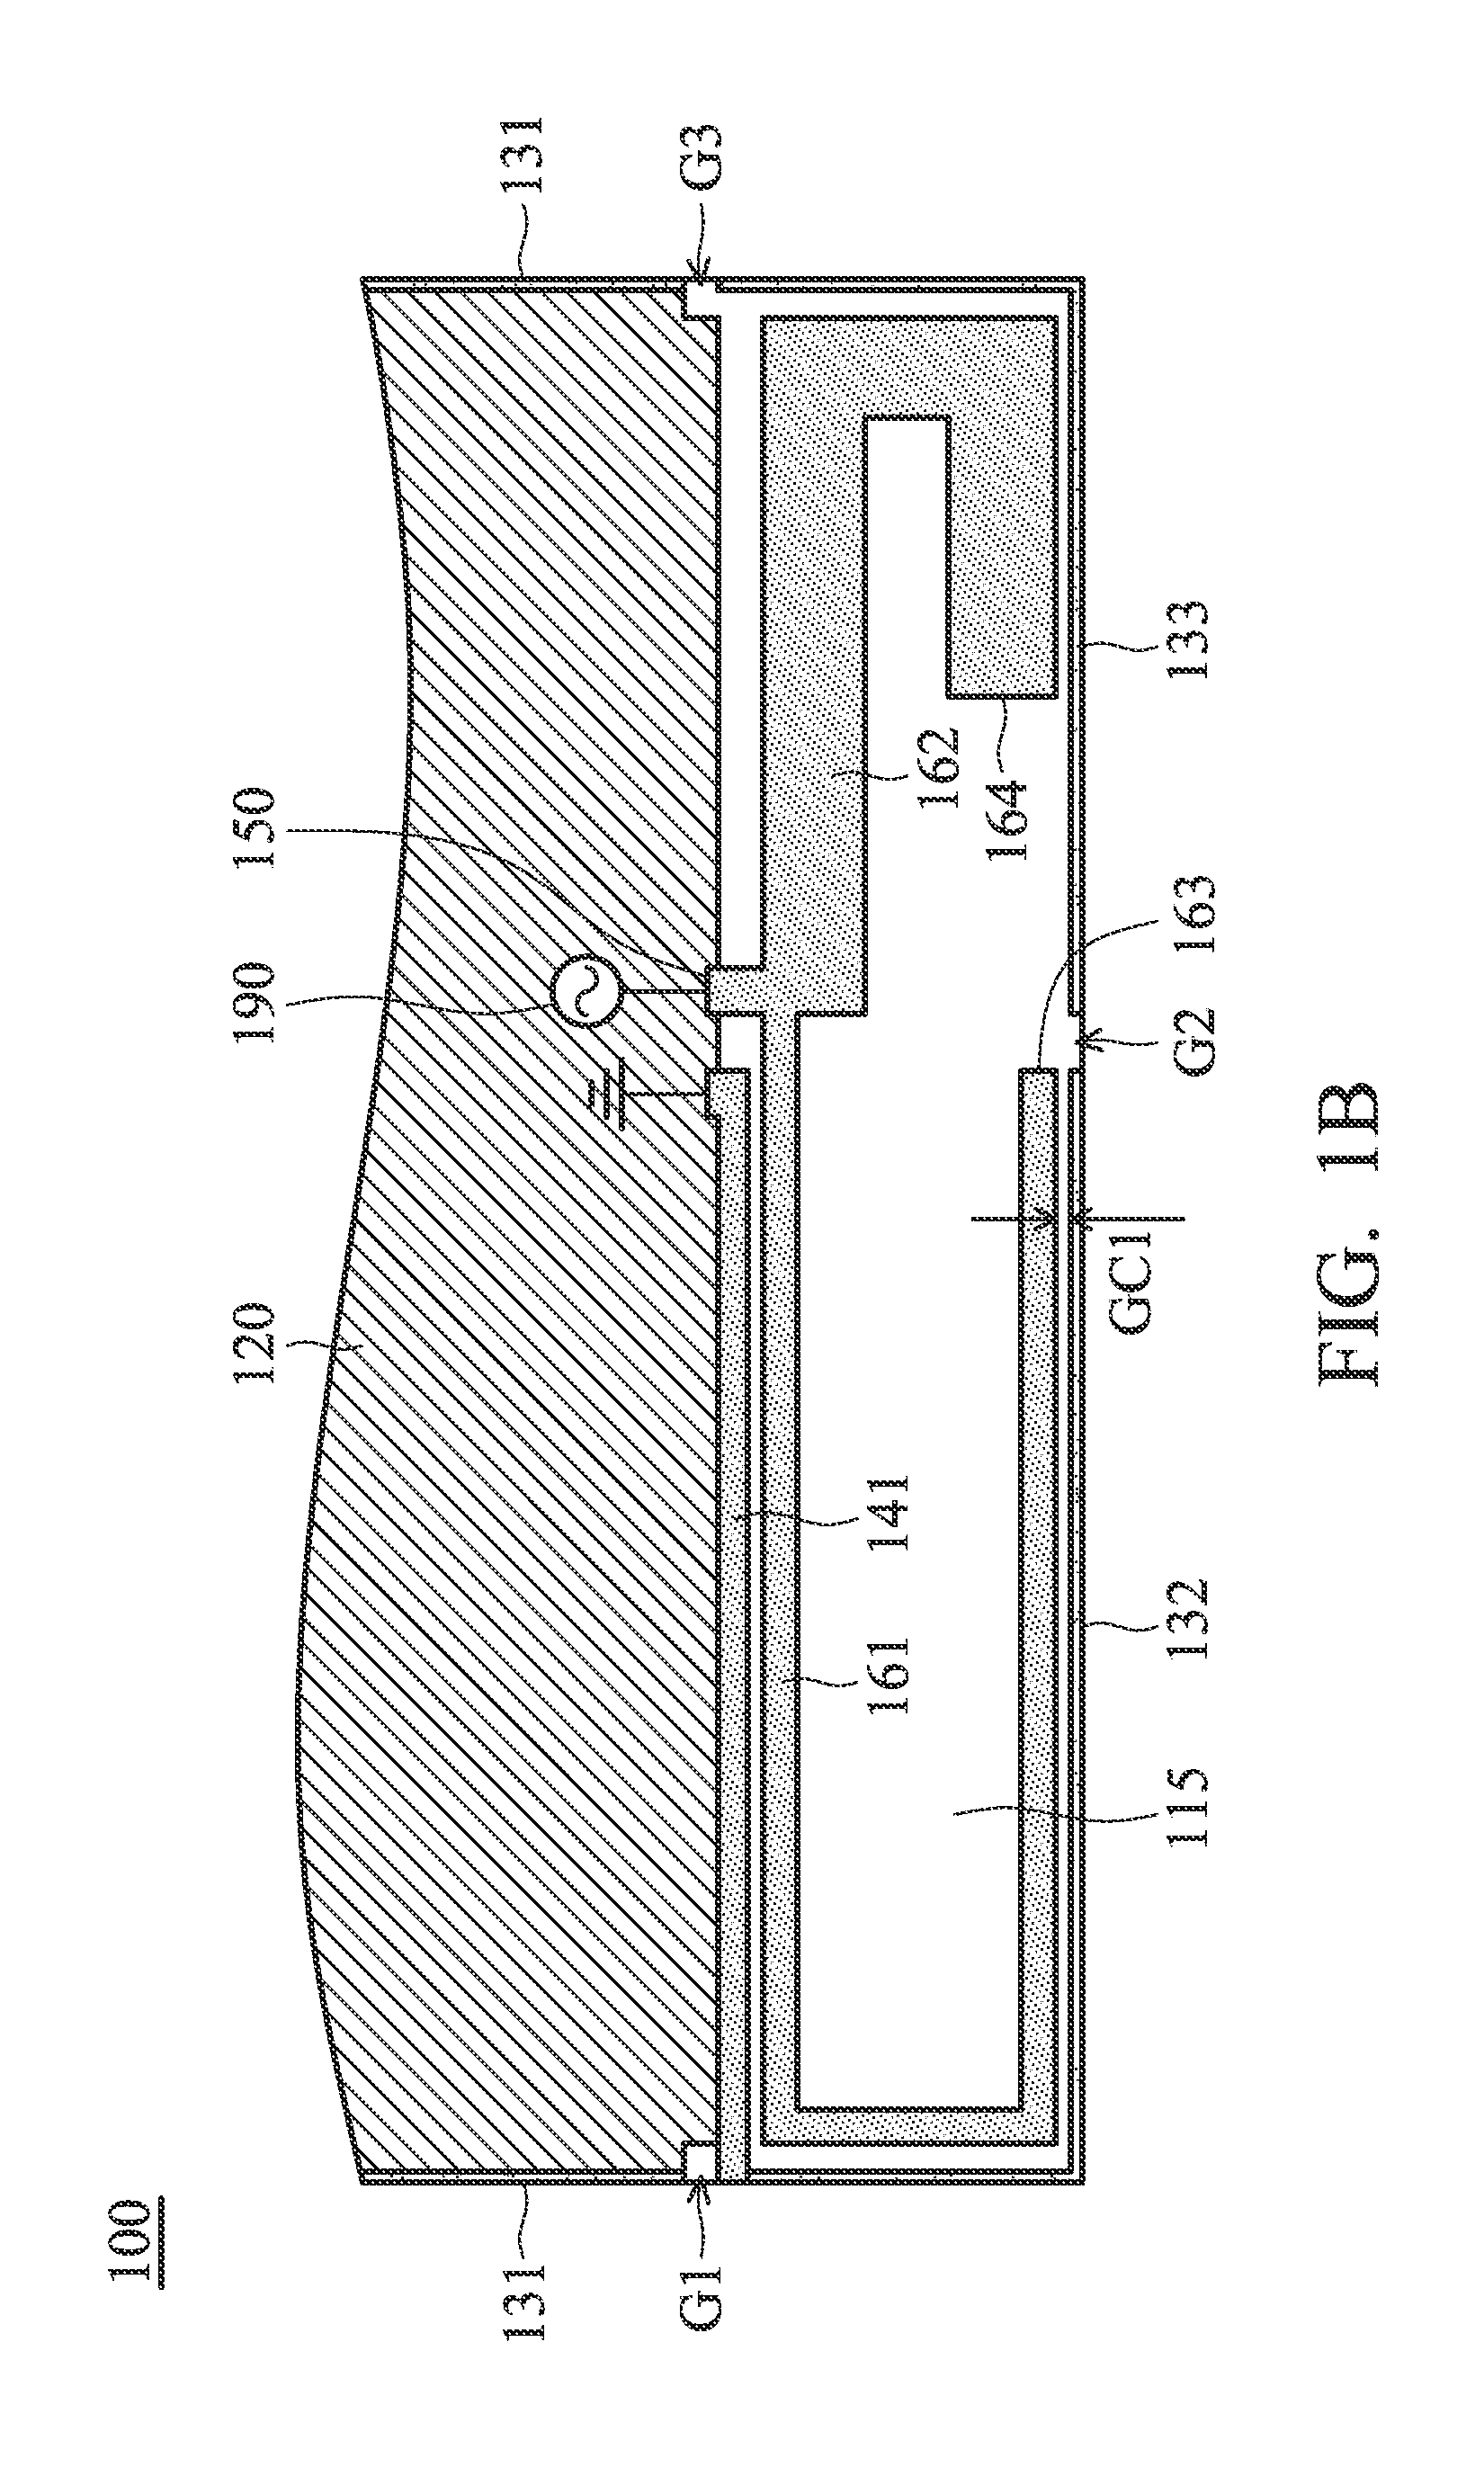 Mobile device and antenna structure with conductive frame